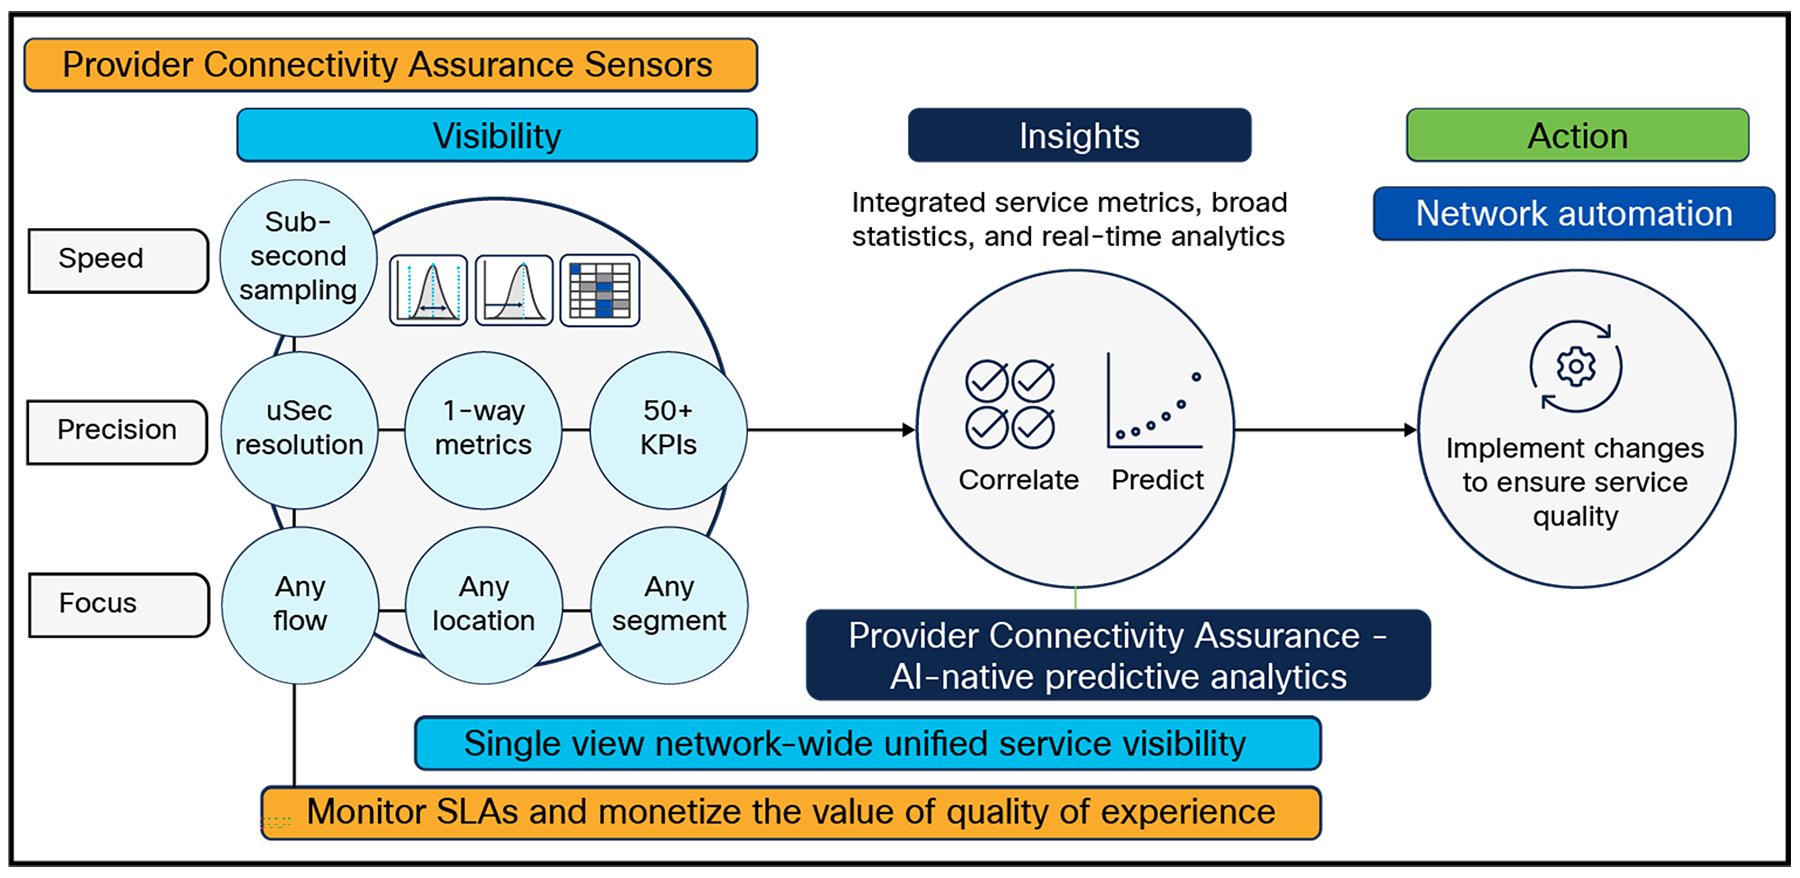 Proactive service assurance with precision and predictive analytics drives service quality